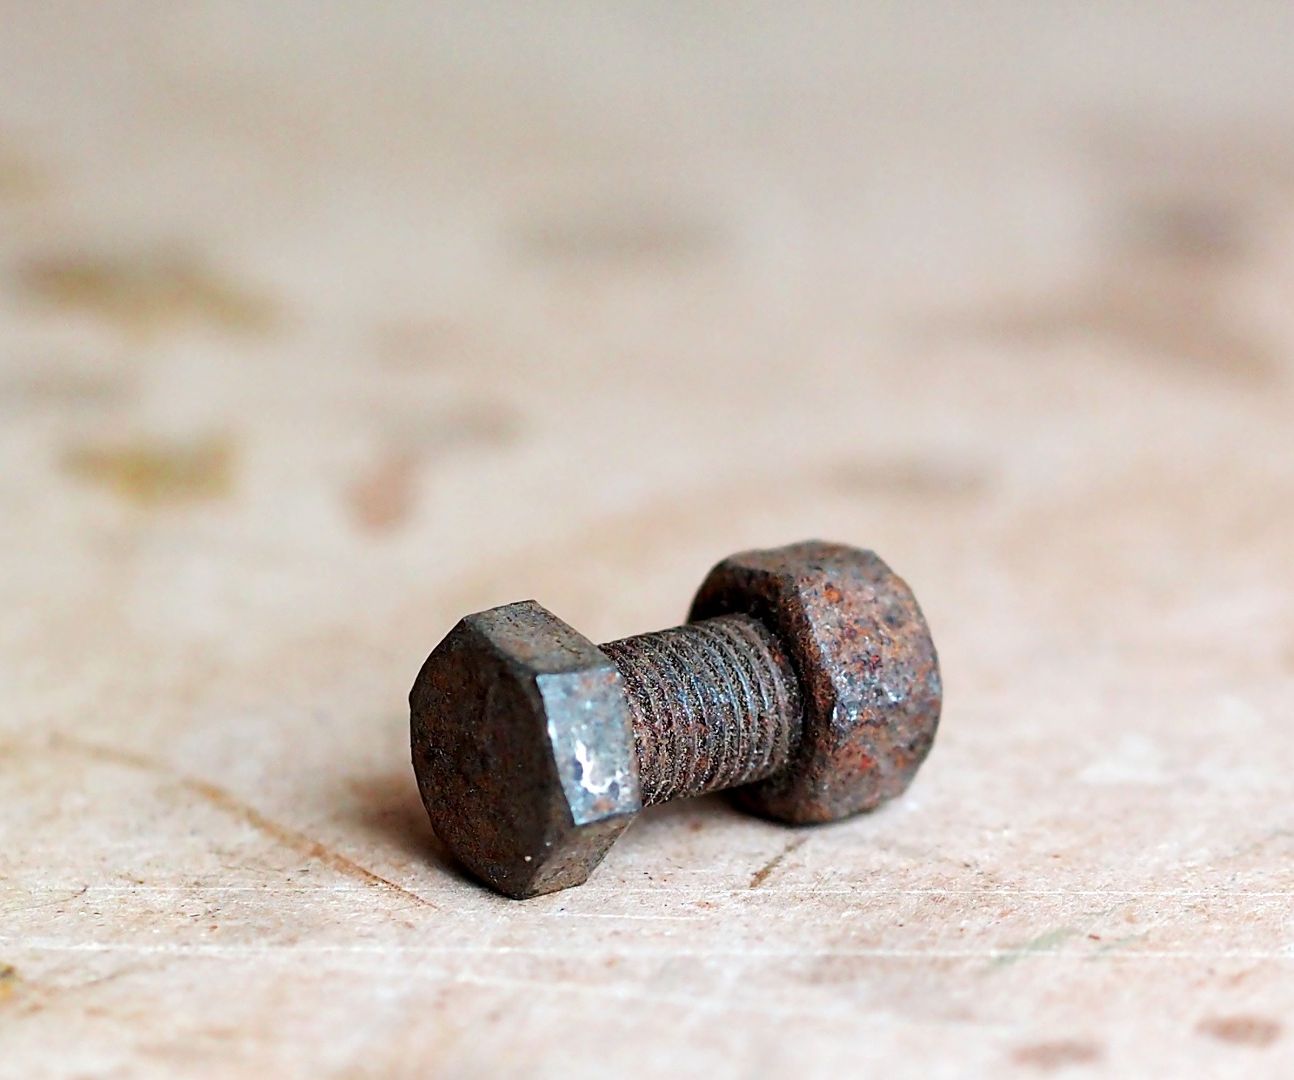 How to Remove a Stubborn Nut/Bolt